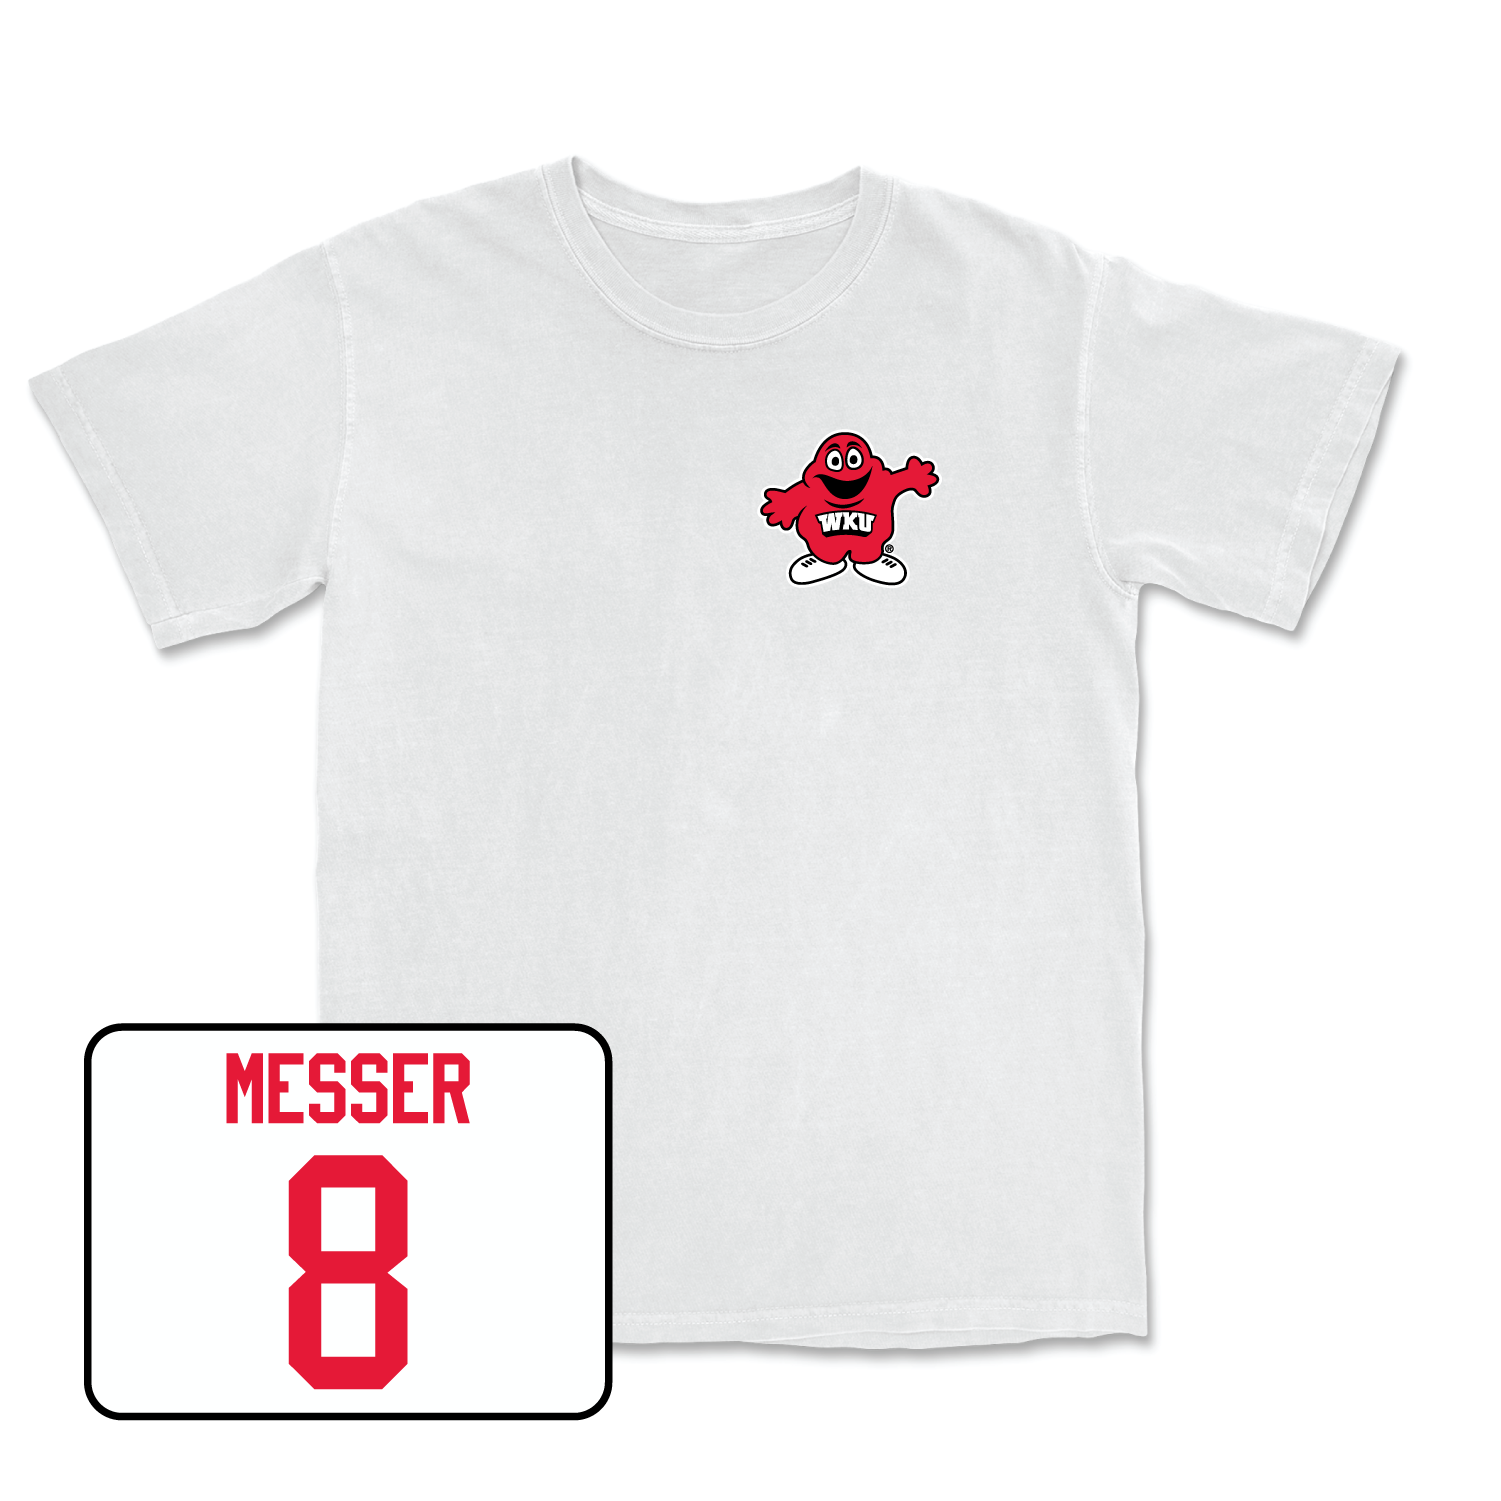 White Football Big Red Comfort Colors Tee 2 X-Large / Easton Messer | #8